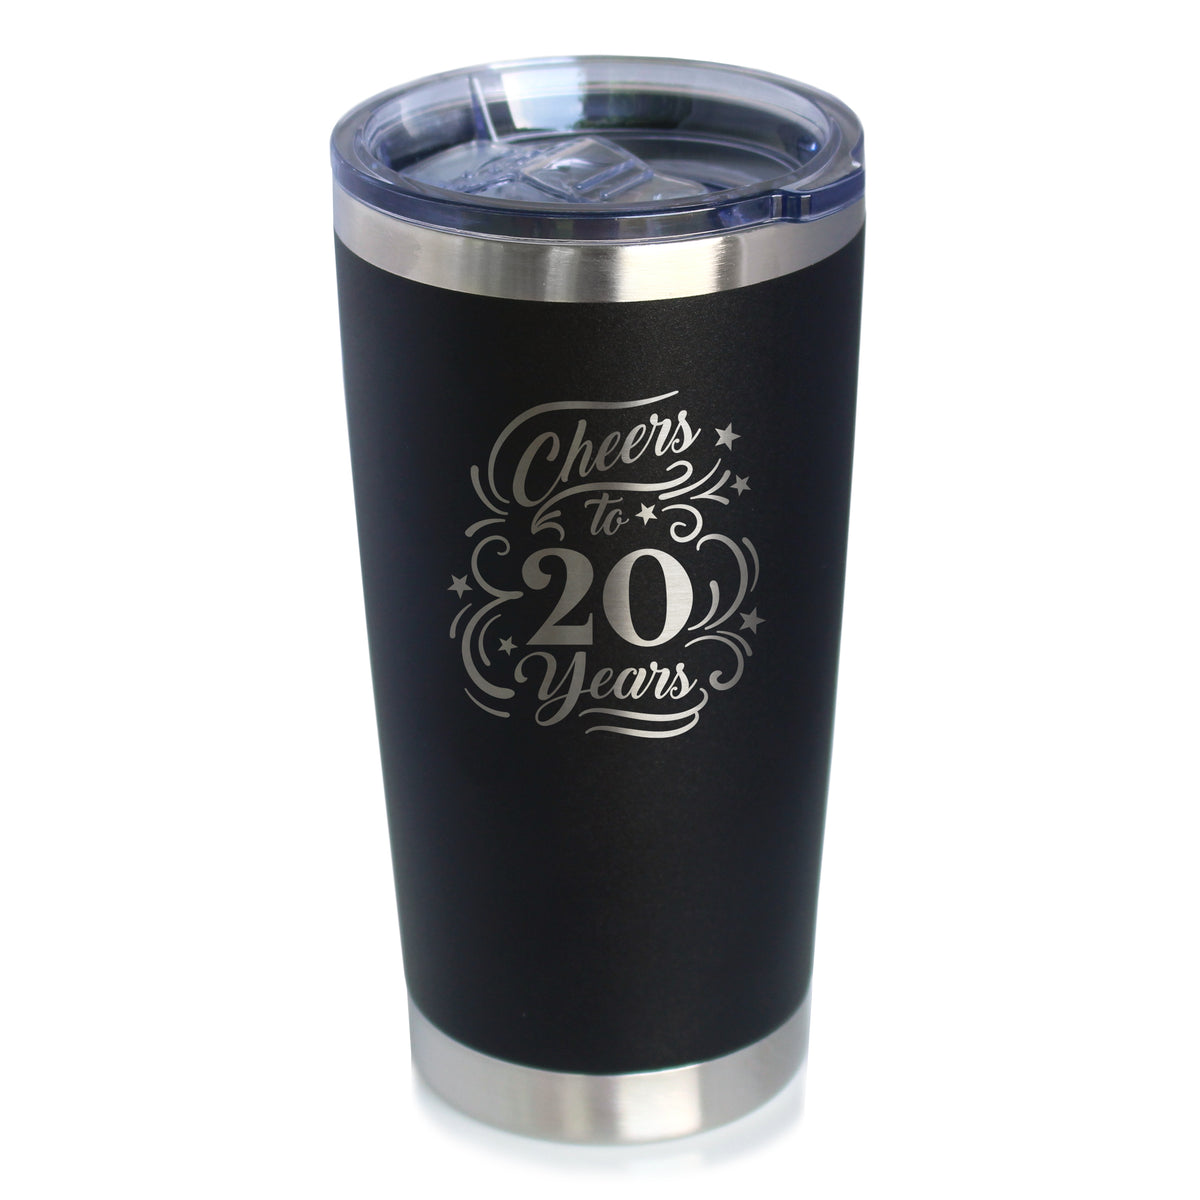 Cheers to 20 Years - Insulated Coffee Tumbler Cup with Sliding Lid - Stainless Steel Insulated Mug - 20th Anniversary Gifts and Party Decor